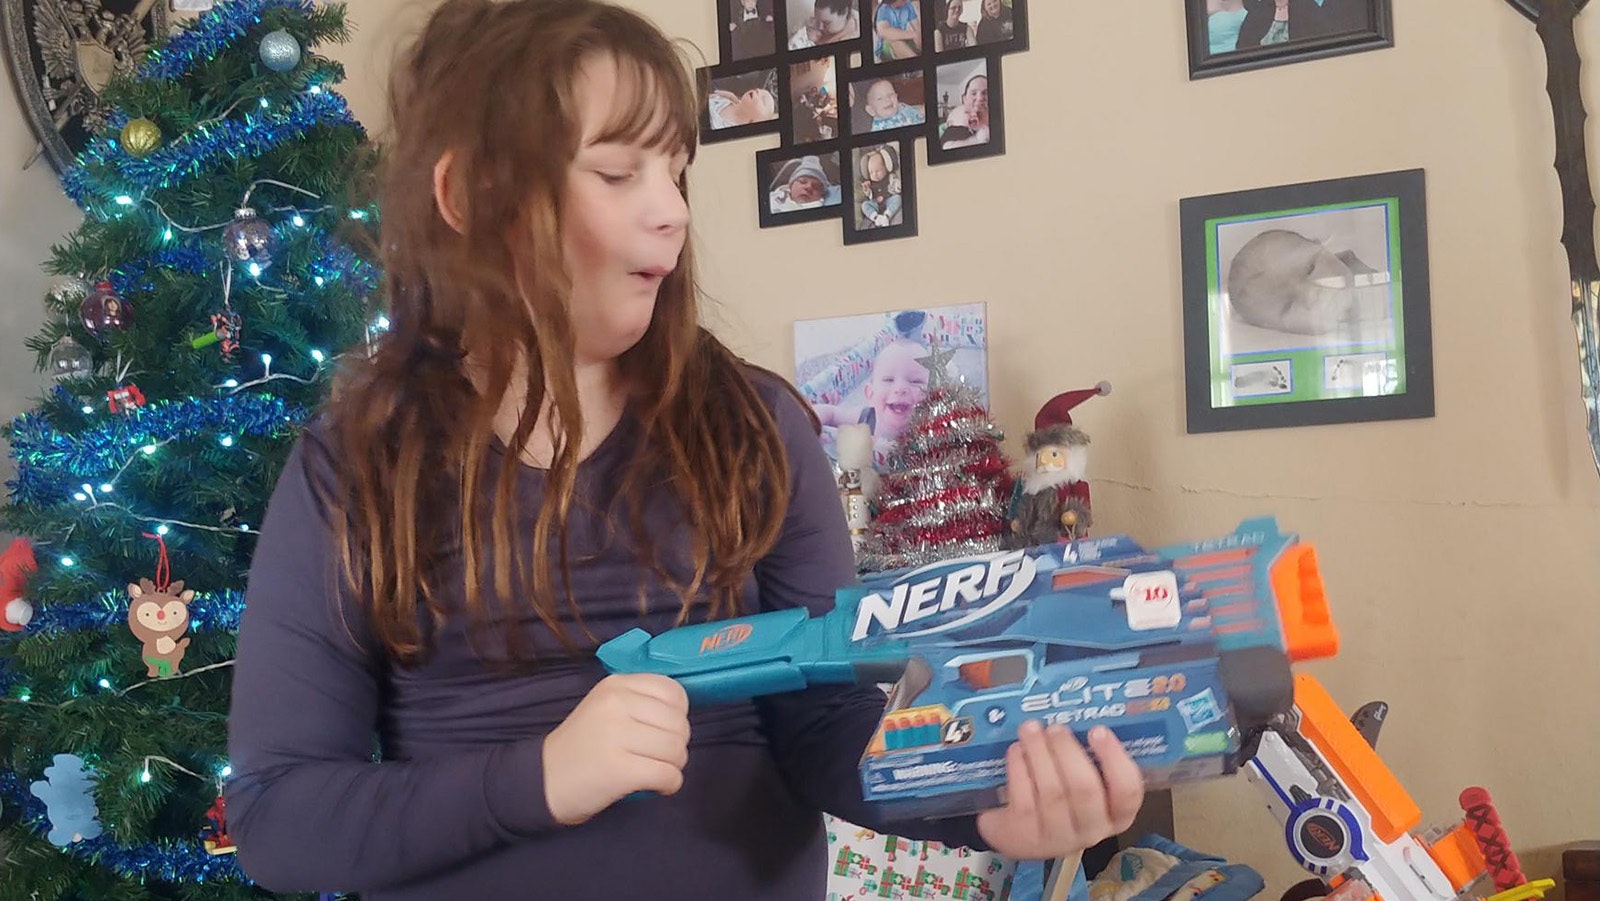 Talyn Reimer reacts to getting a Nerf gun for Christmas.